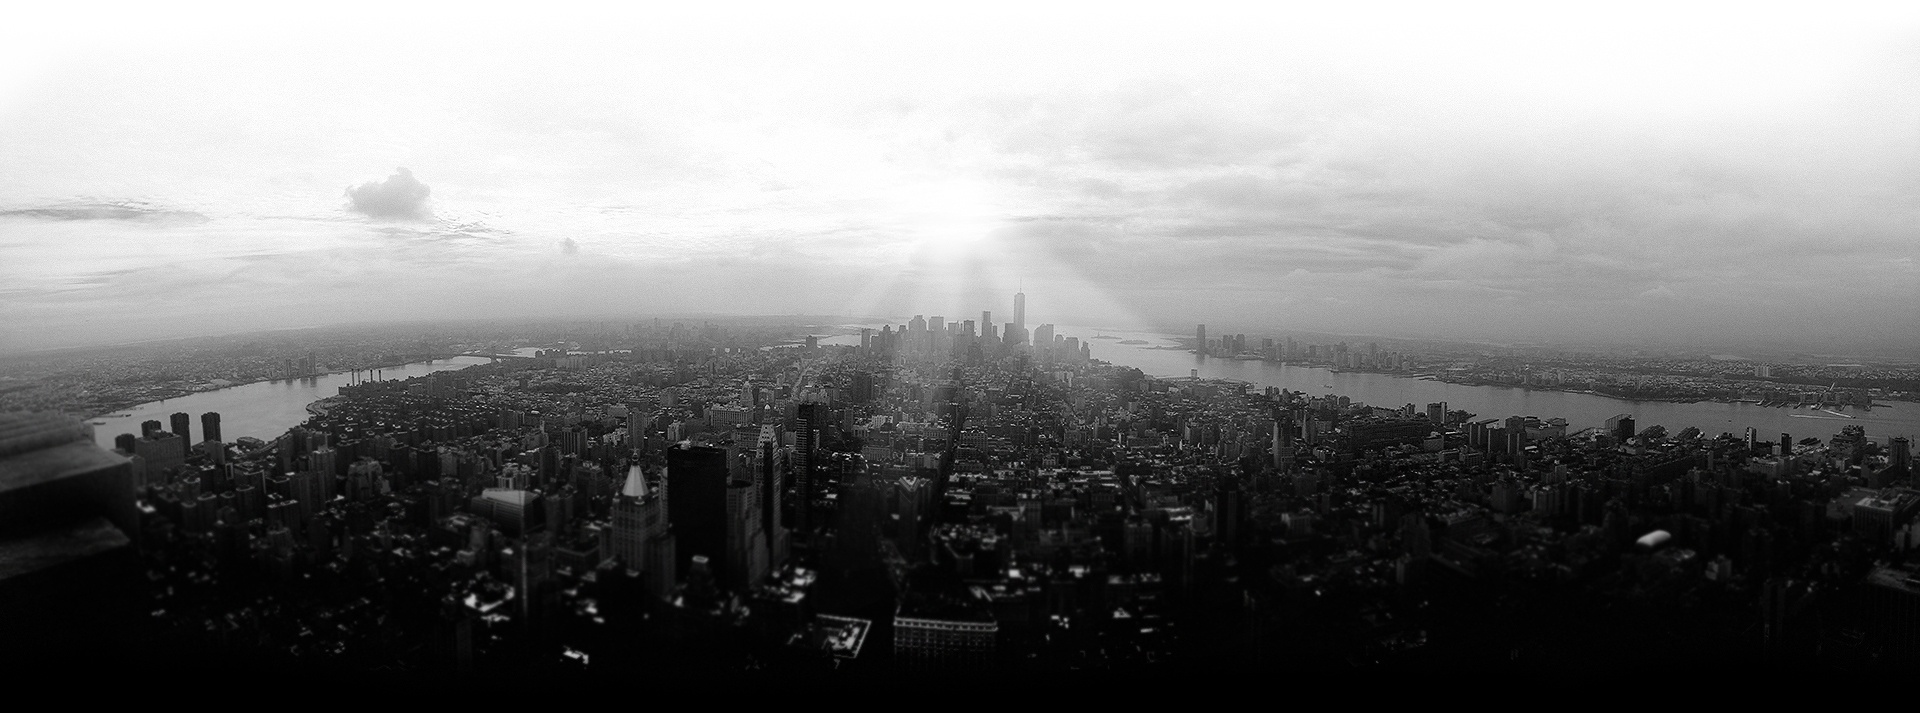 black and white NYC skyline buildings